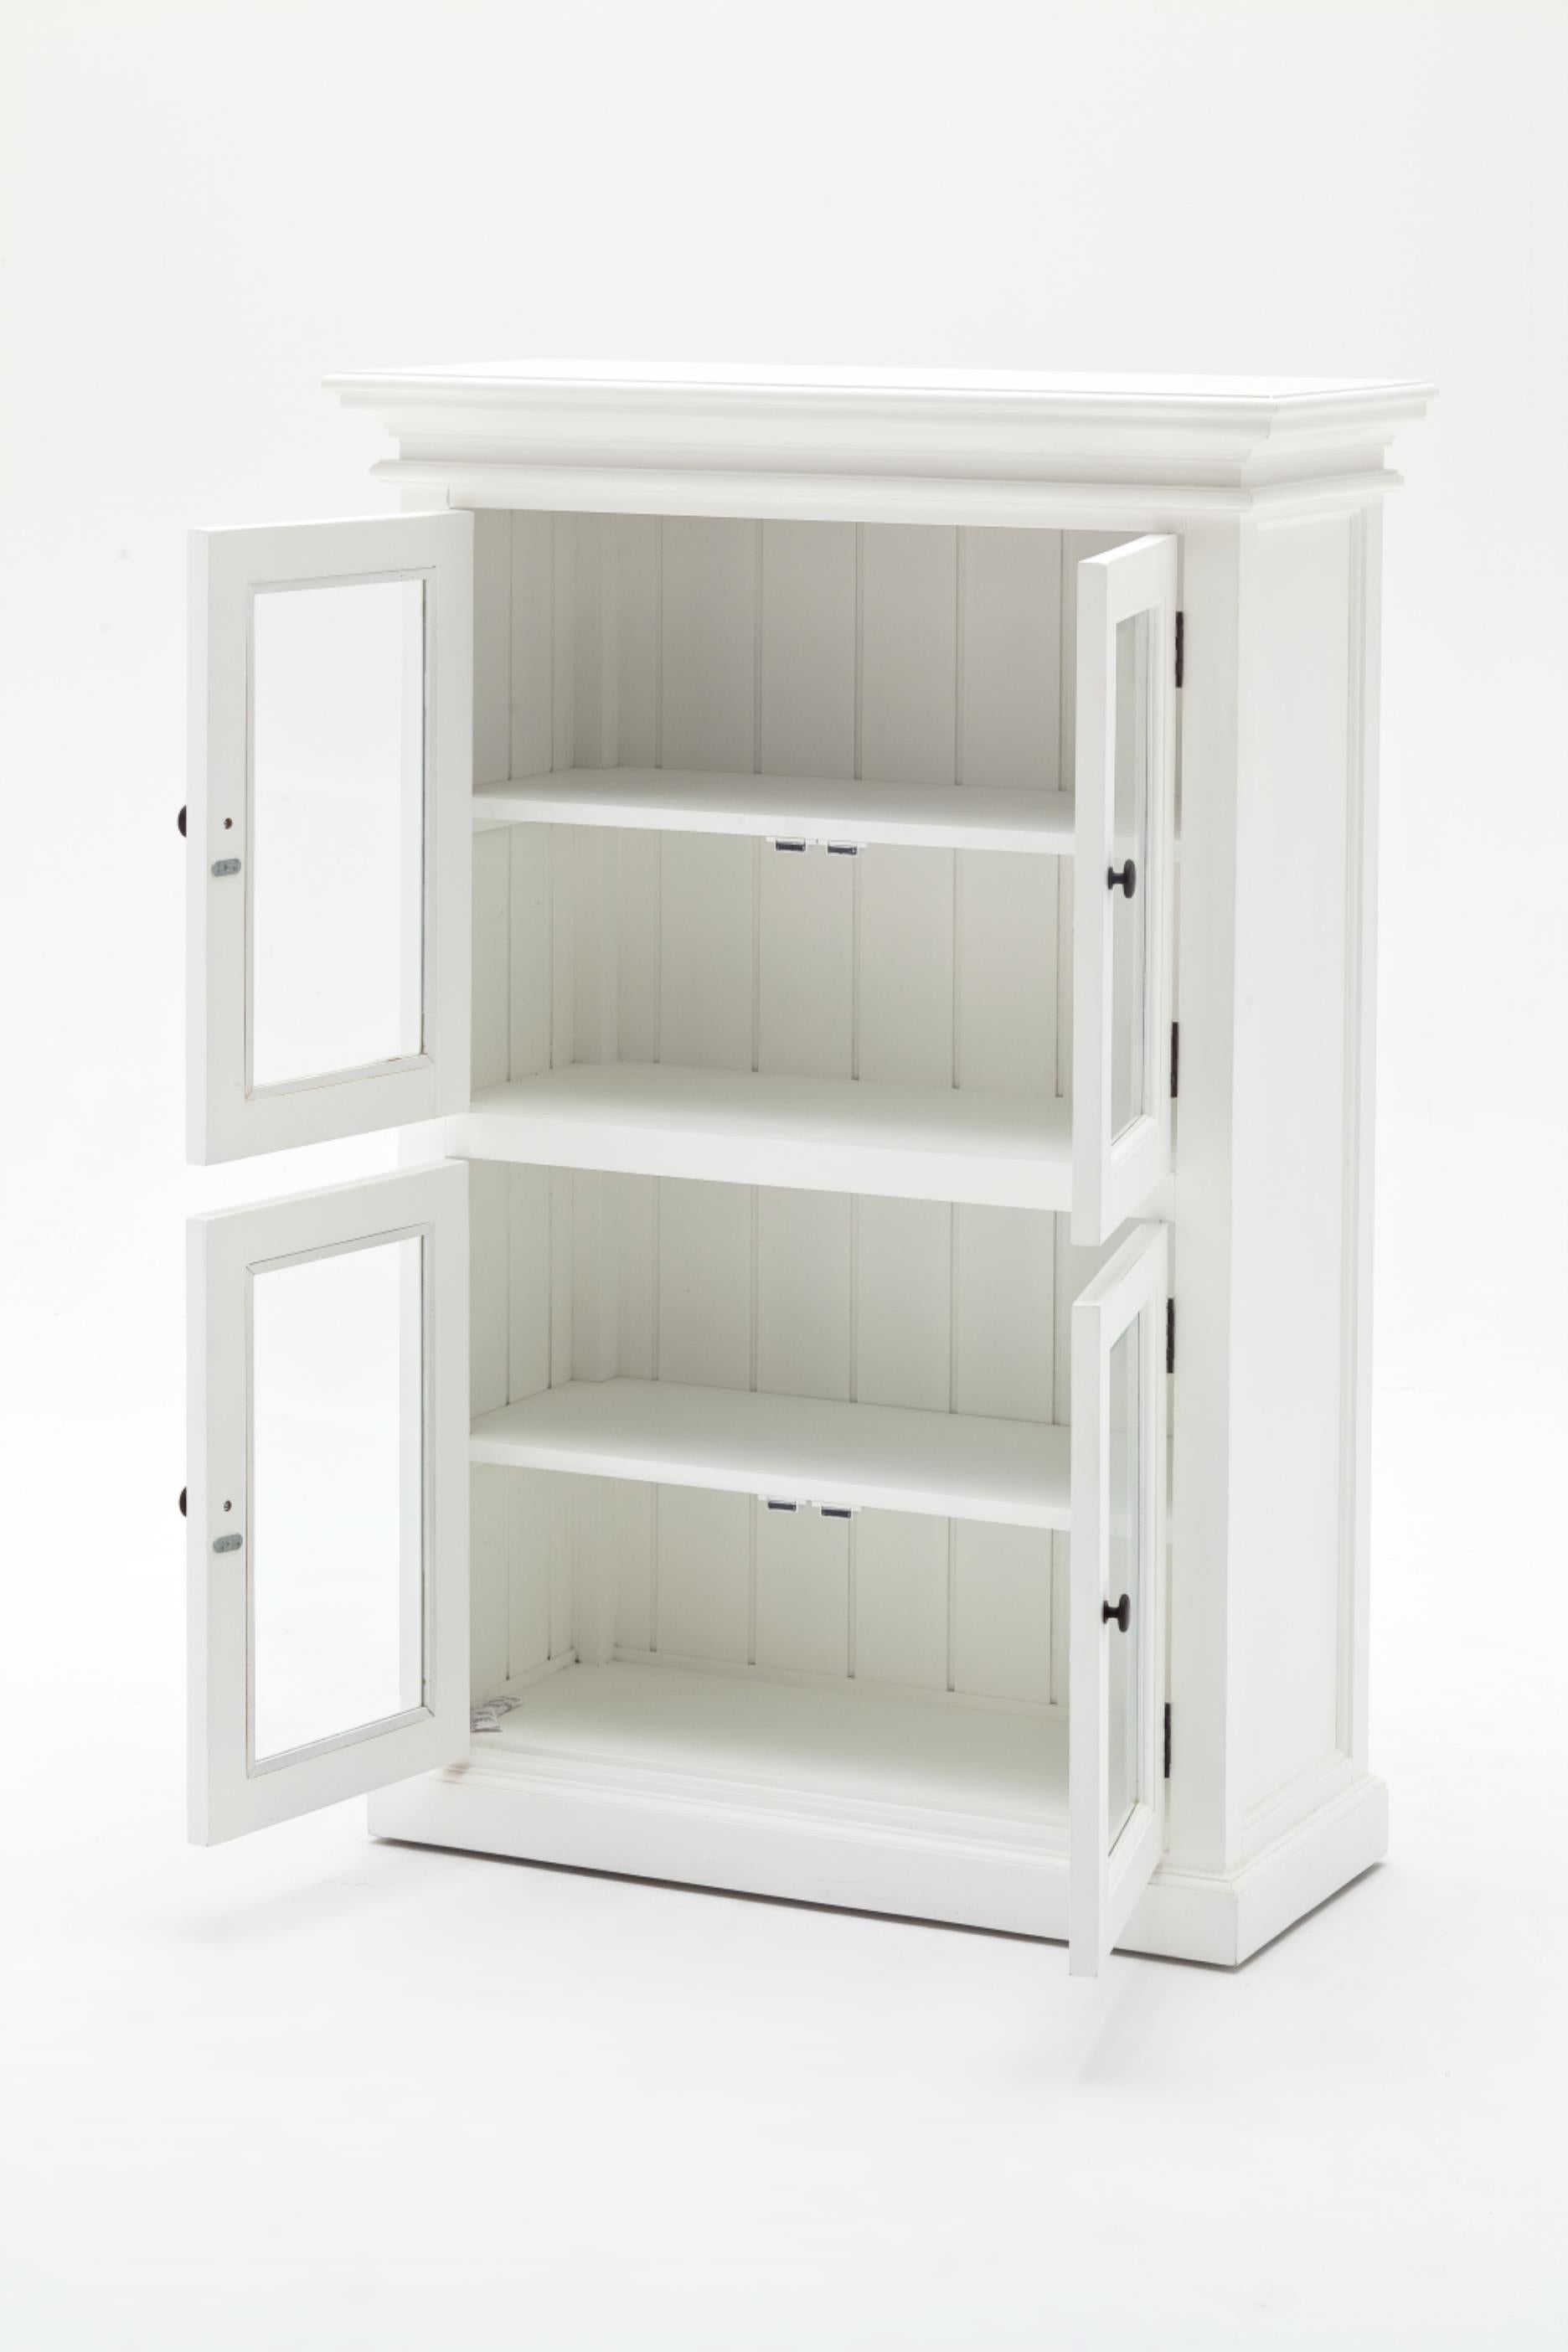 Halifax collection by Nova Solo.  2 Level Pantry CasaFenix